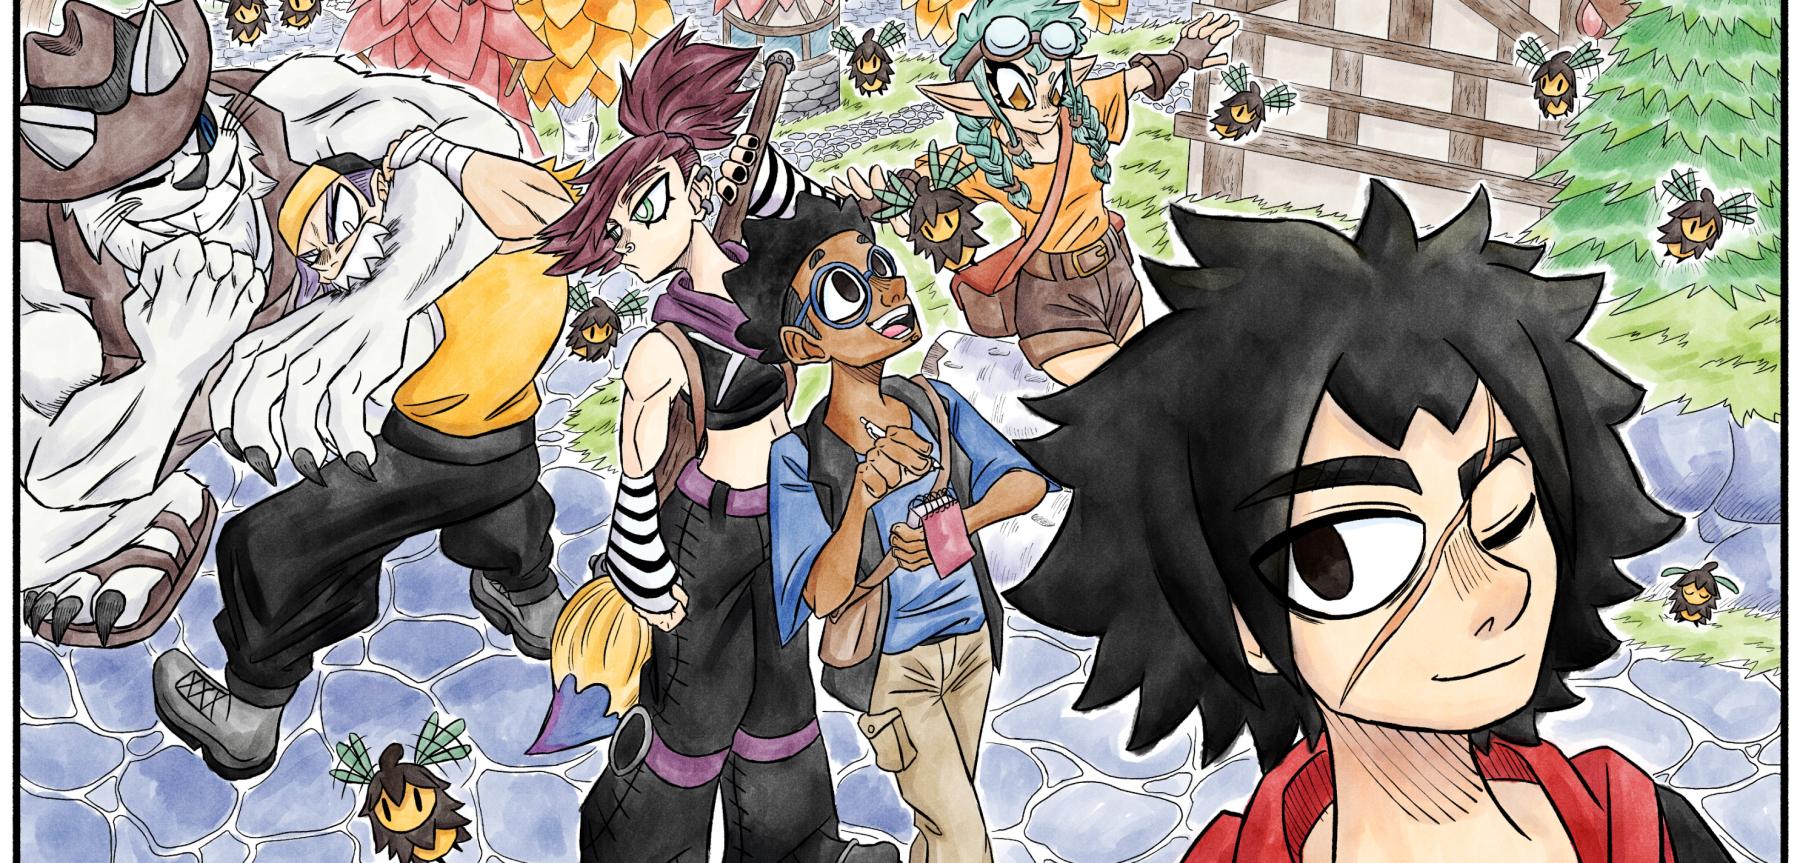 A colorful manga-style illustration of a variety of cartoon characters on a cobblestone street with a windmill in the background,